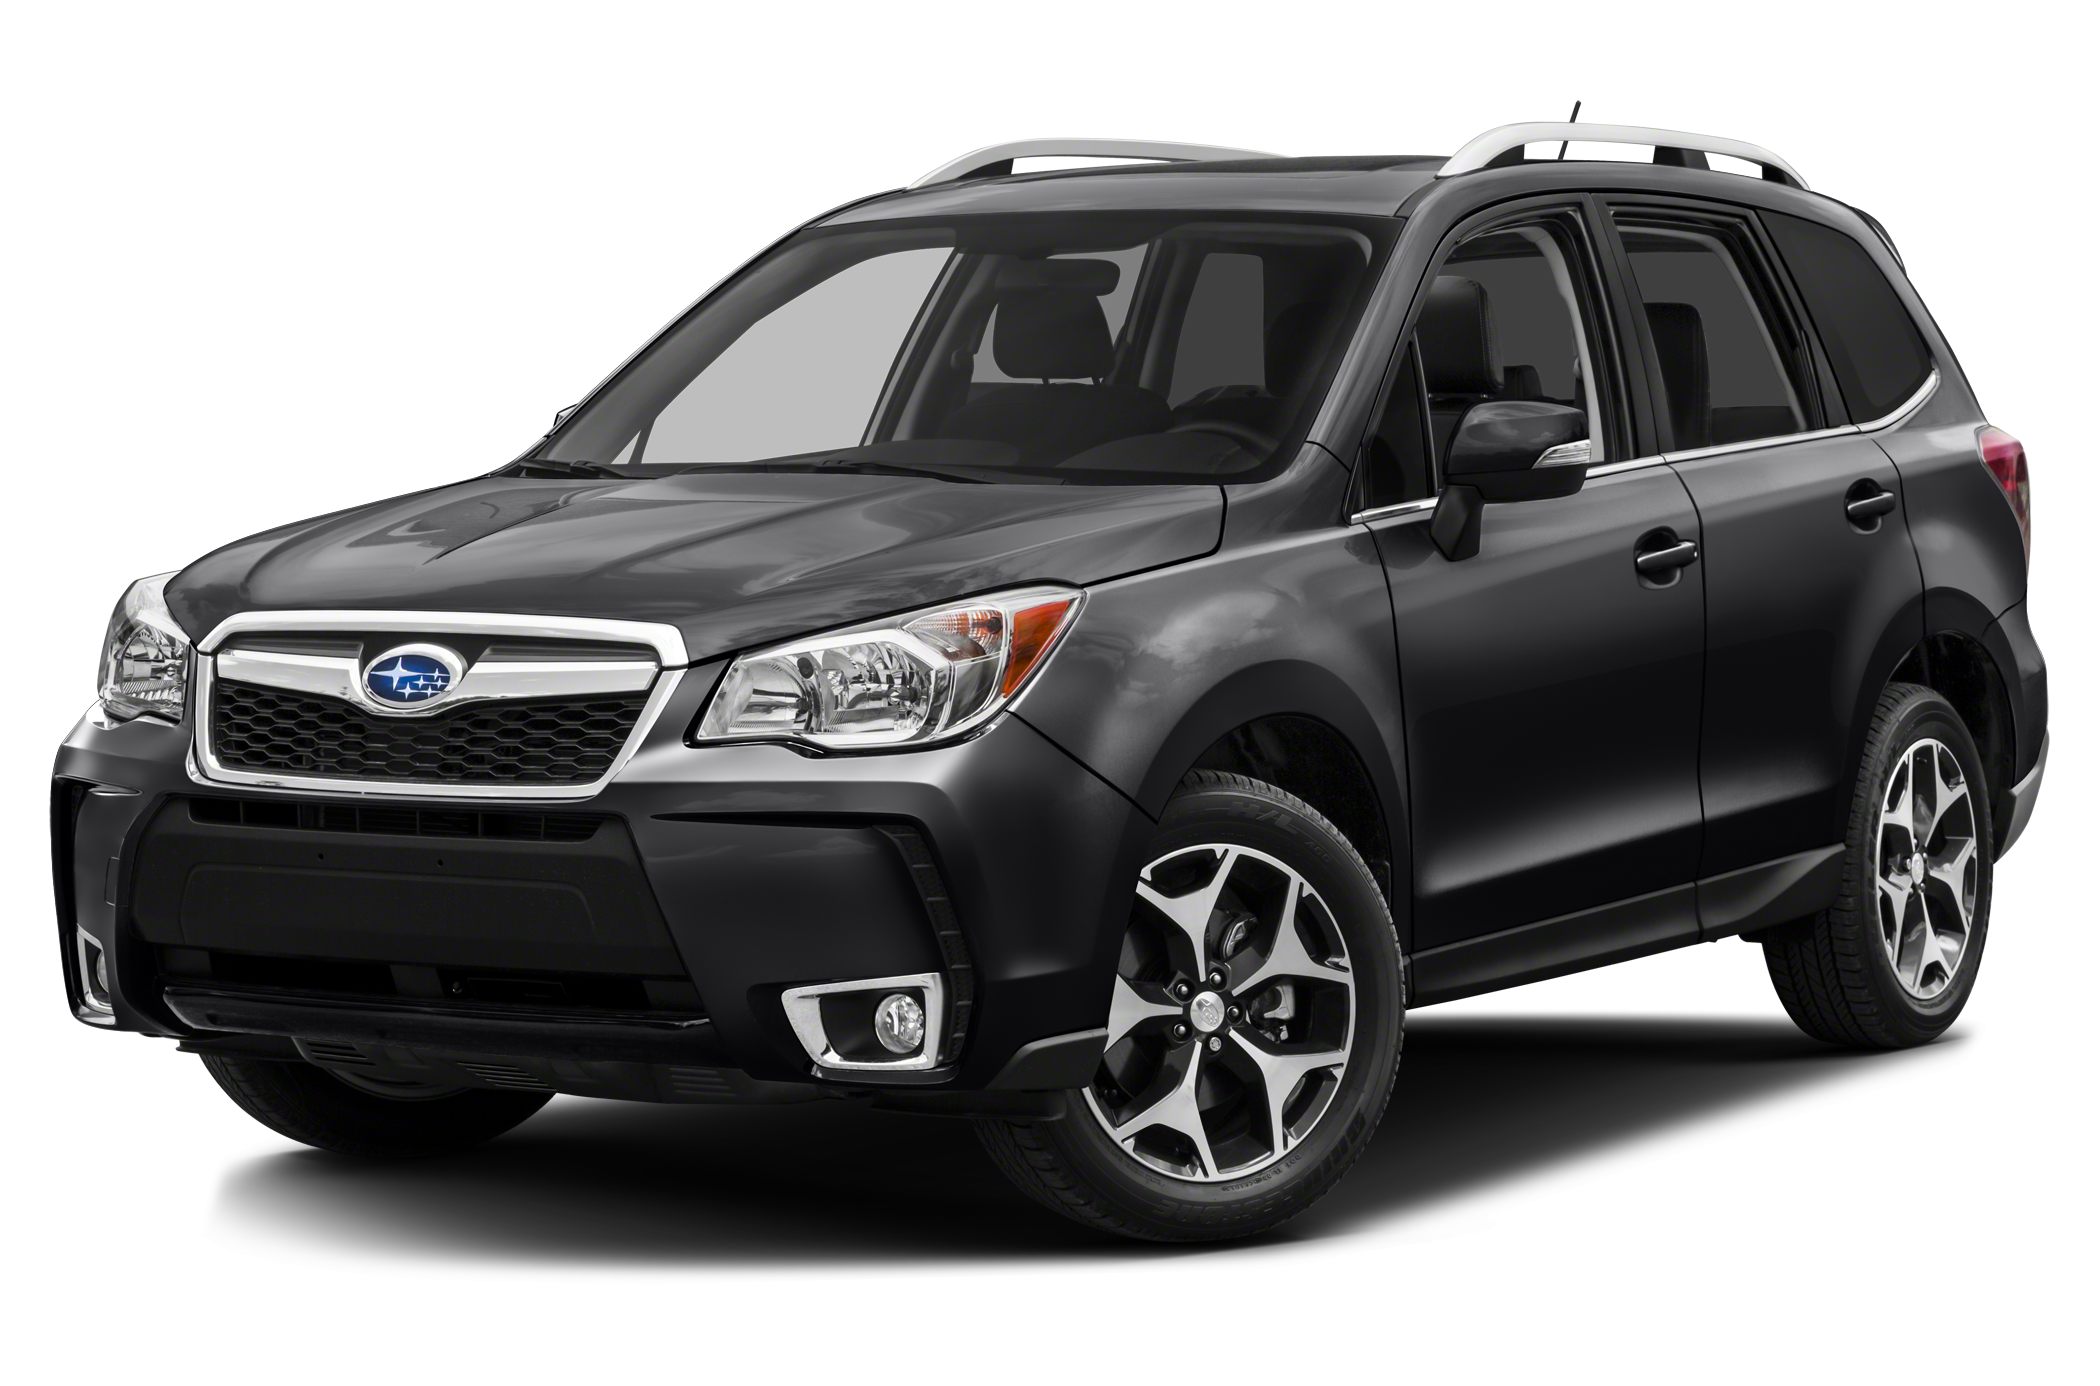 2016 Subaru Forester 2 0xt Premium 4dr All Wheel Drive Specs And Prices